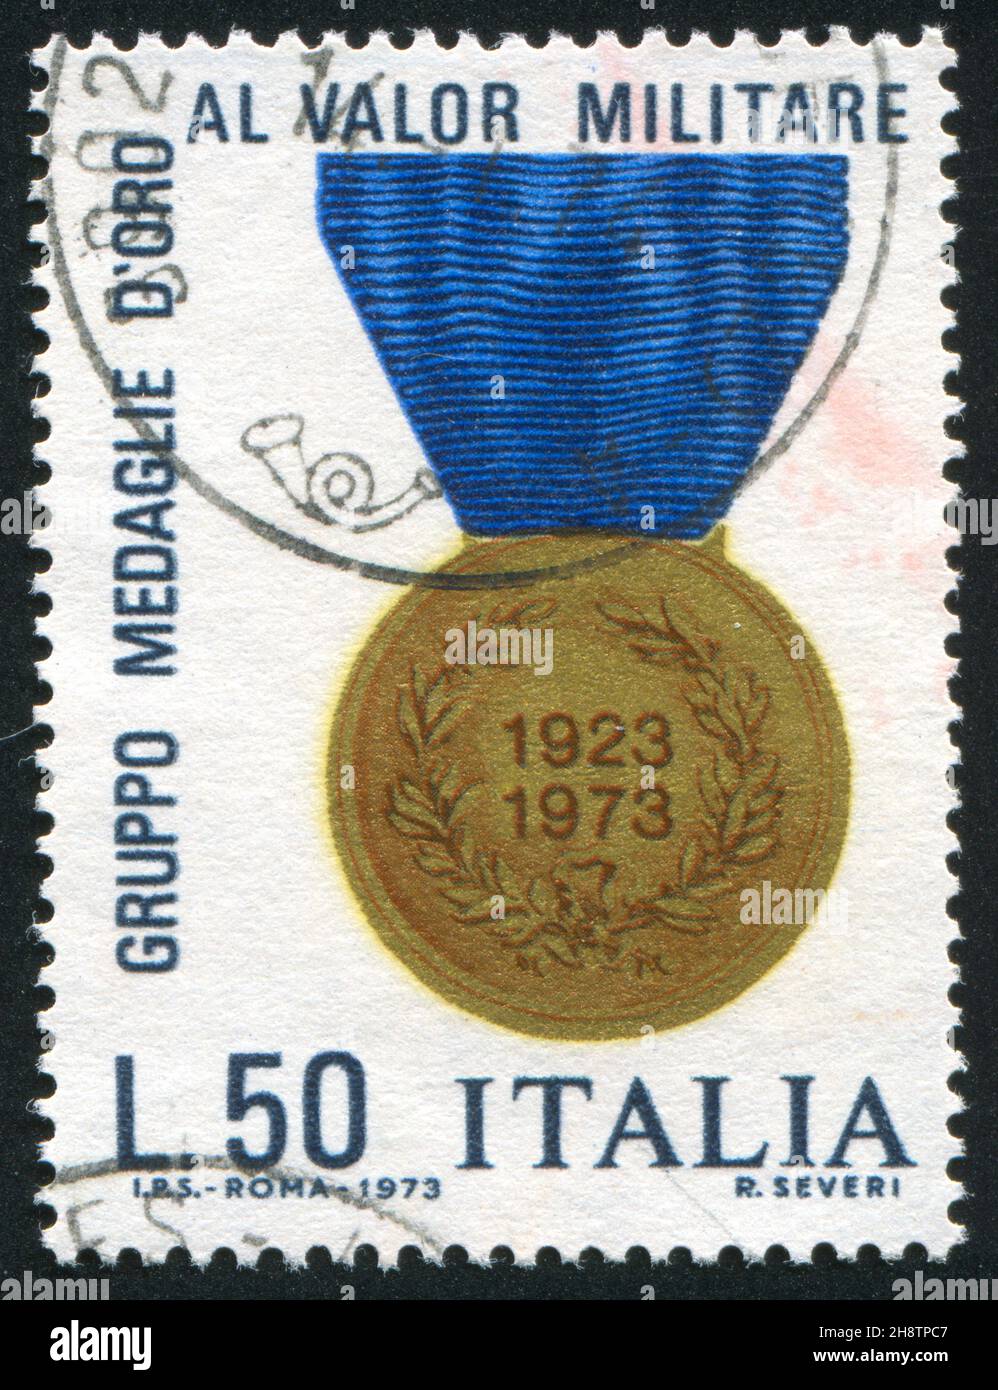 ITALY - CIRCA 1973: stamp printed by Italy, shows Gold medal of Valor, circa 1973 Stock Photo